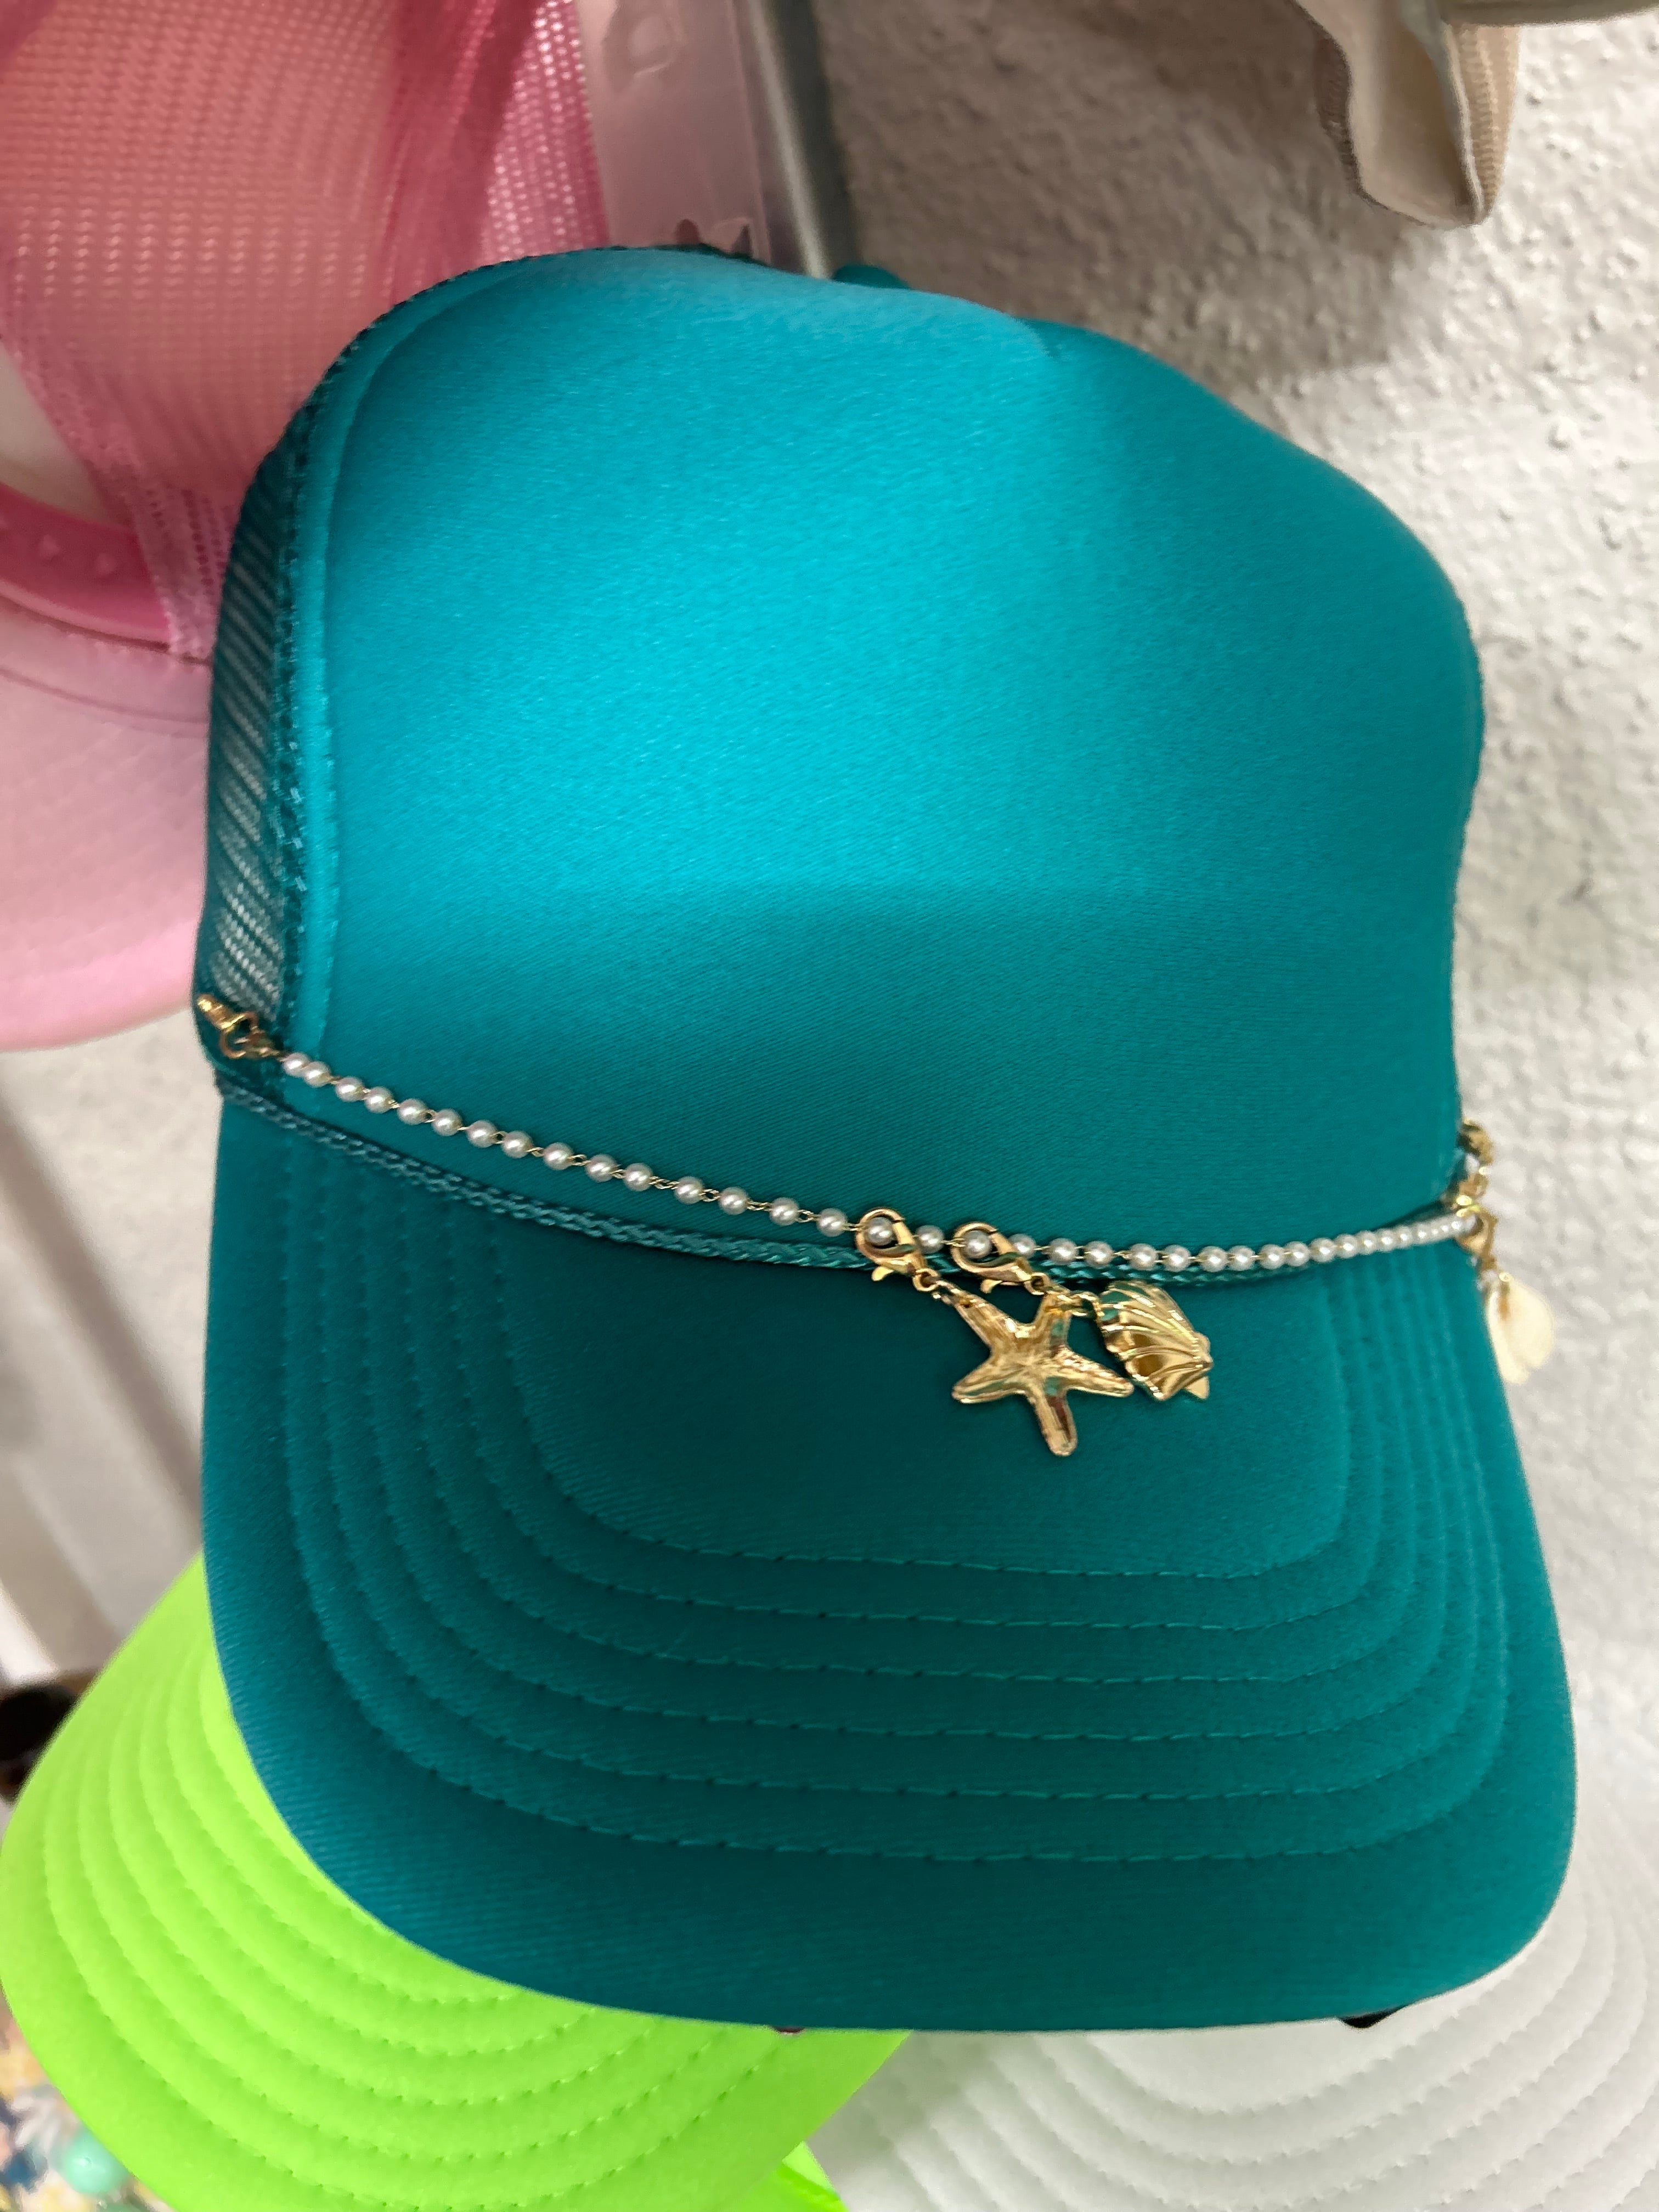 Trucker hat with chains